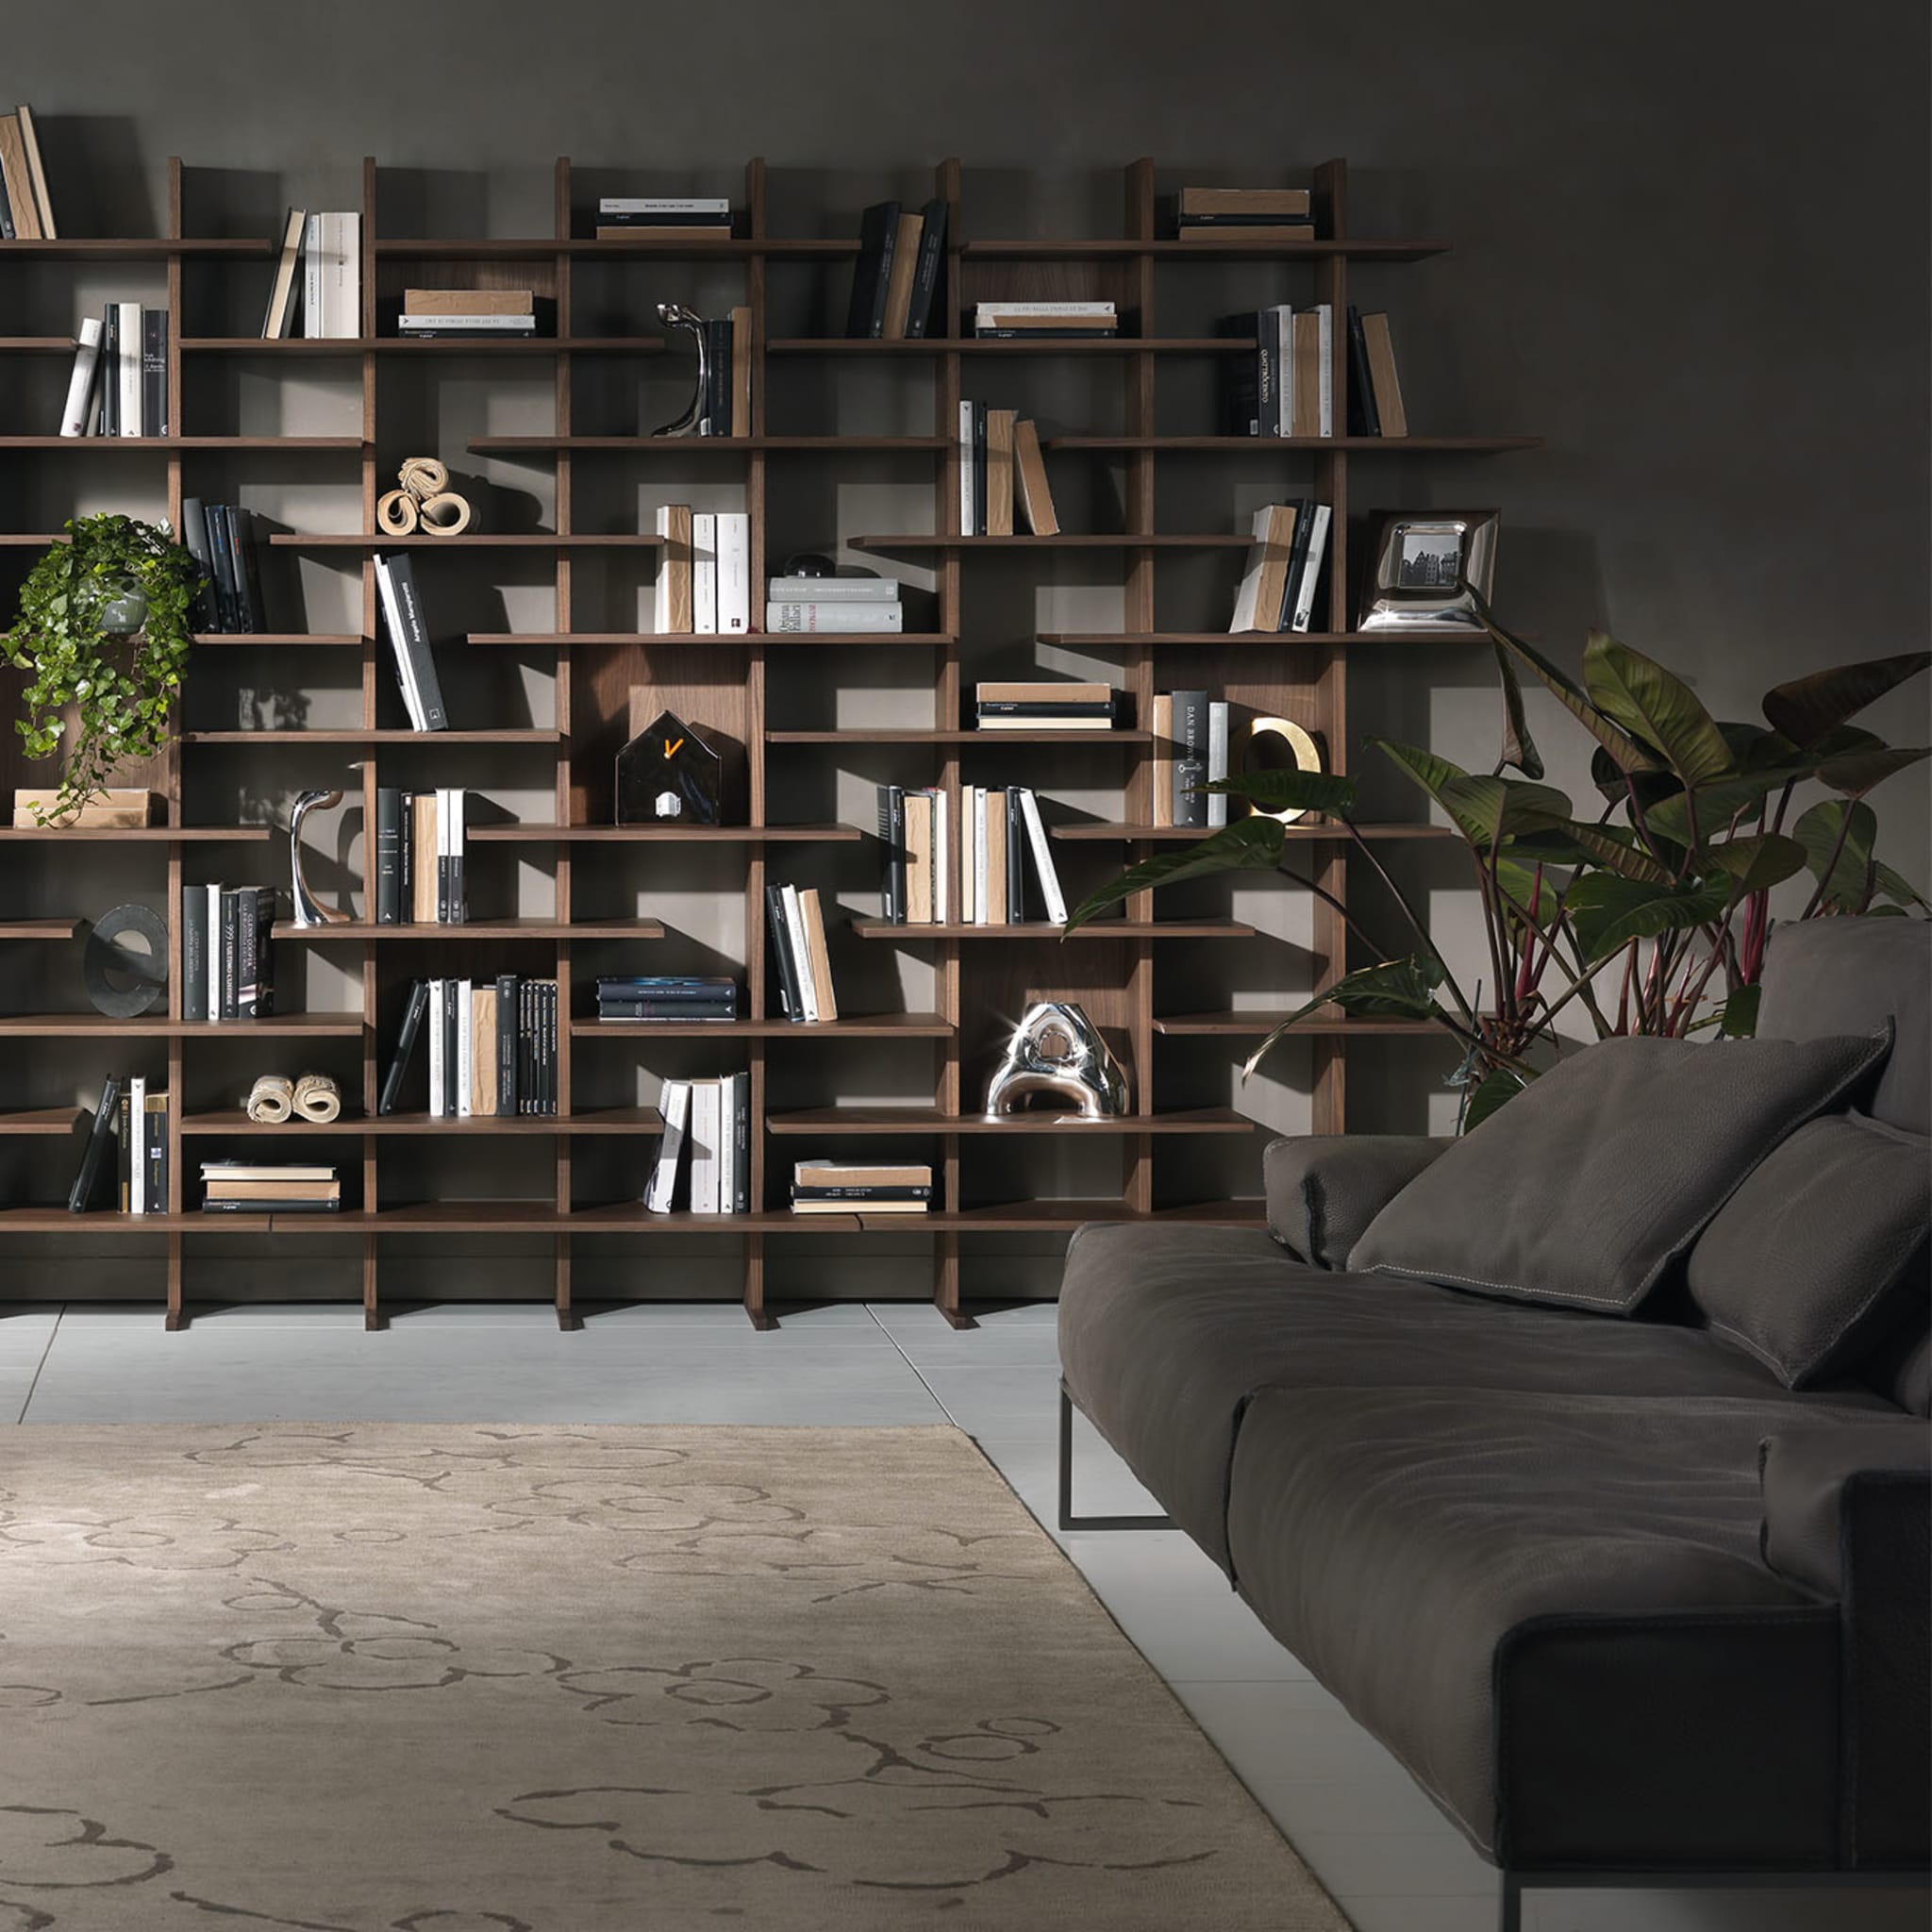 Elisabeth Bookcase #4 by Cesare Arosio and Beatrice Fanchini - Alternative view 2